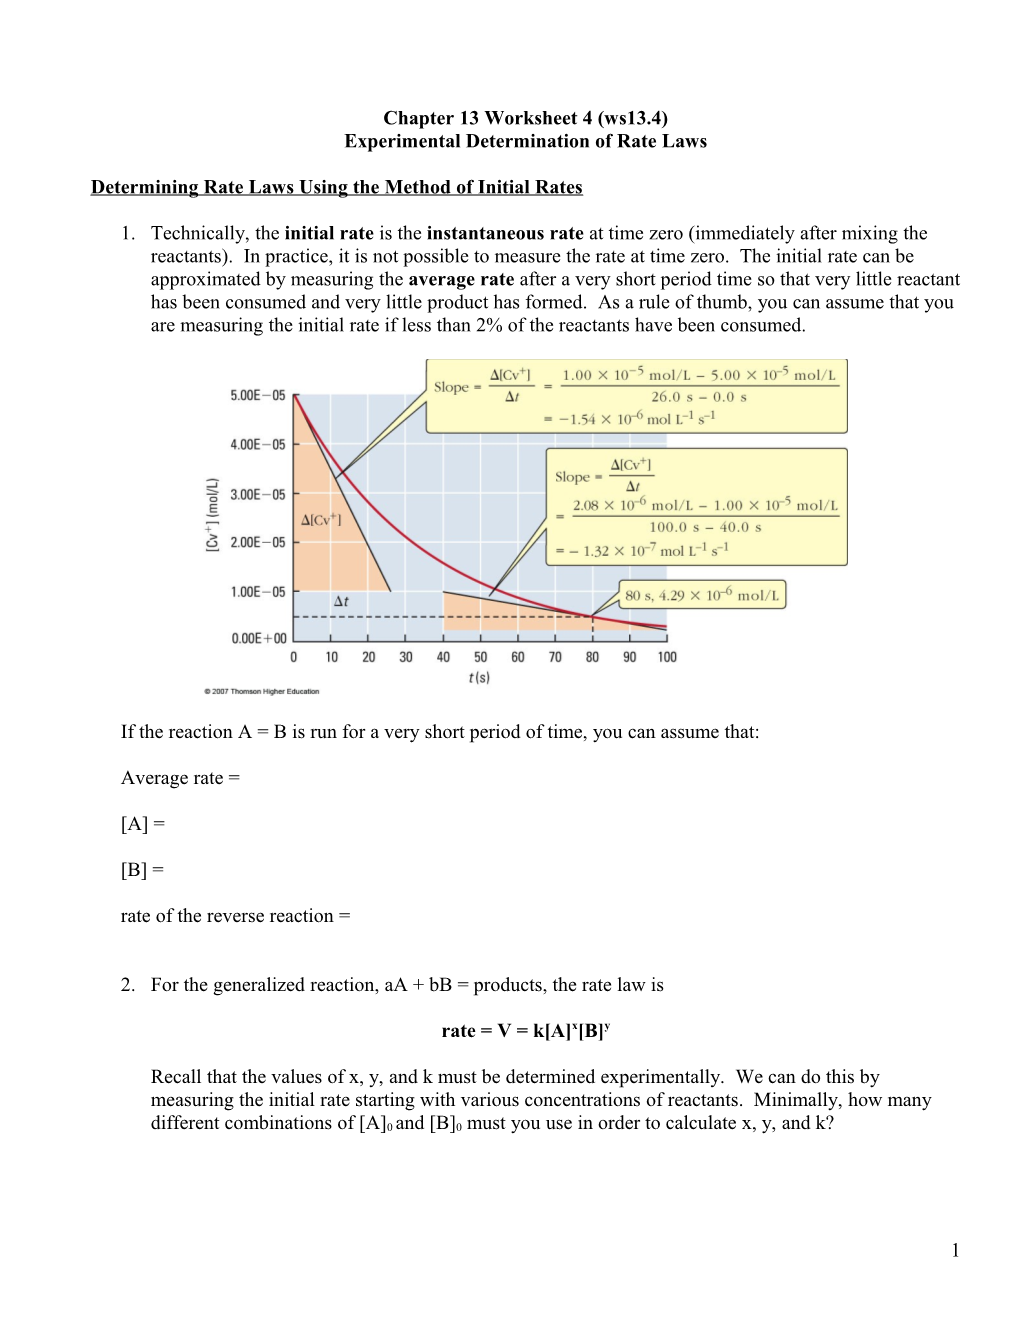 Experimental Determination of Rate Laws